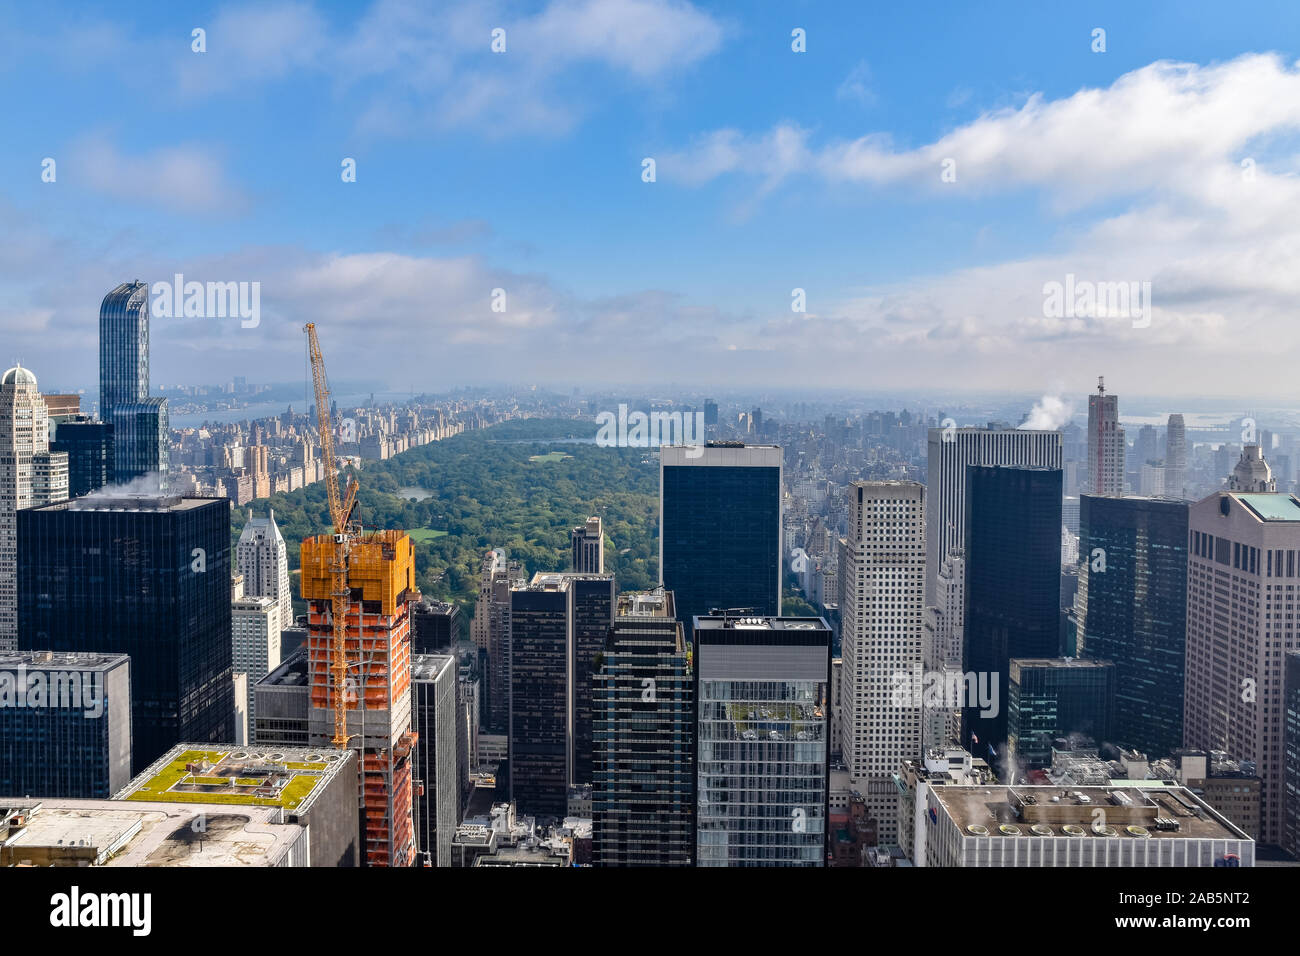 Aerial view of New York with skyscrapers, buildings in construction and central park in the background. Sunny day with some clouds. Concept of travel Stock Photo